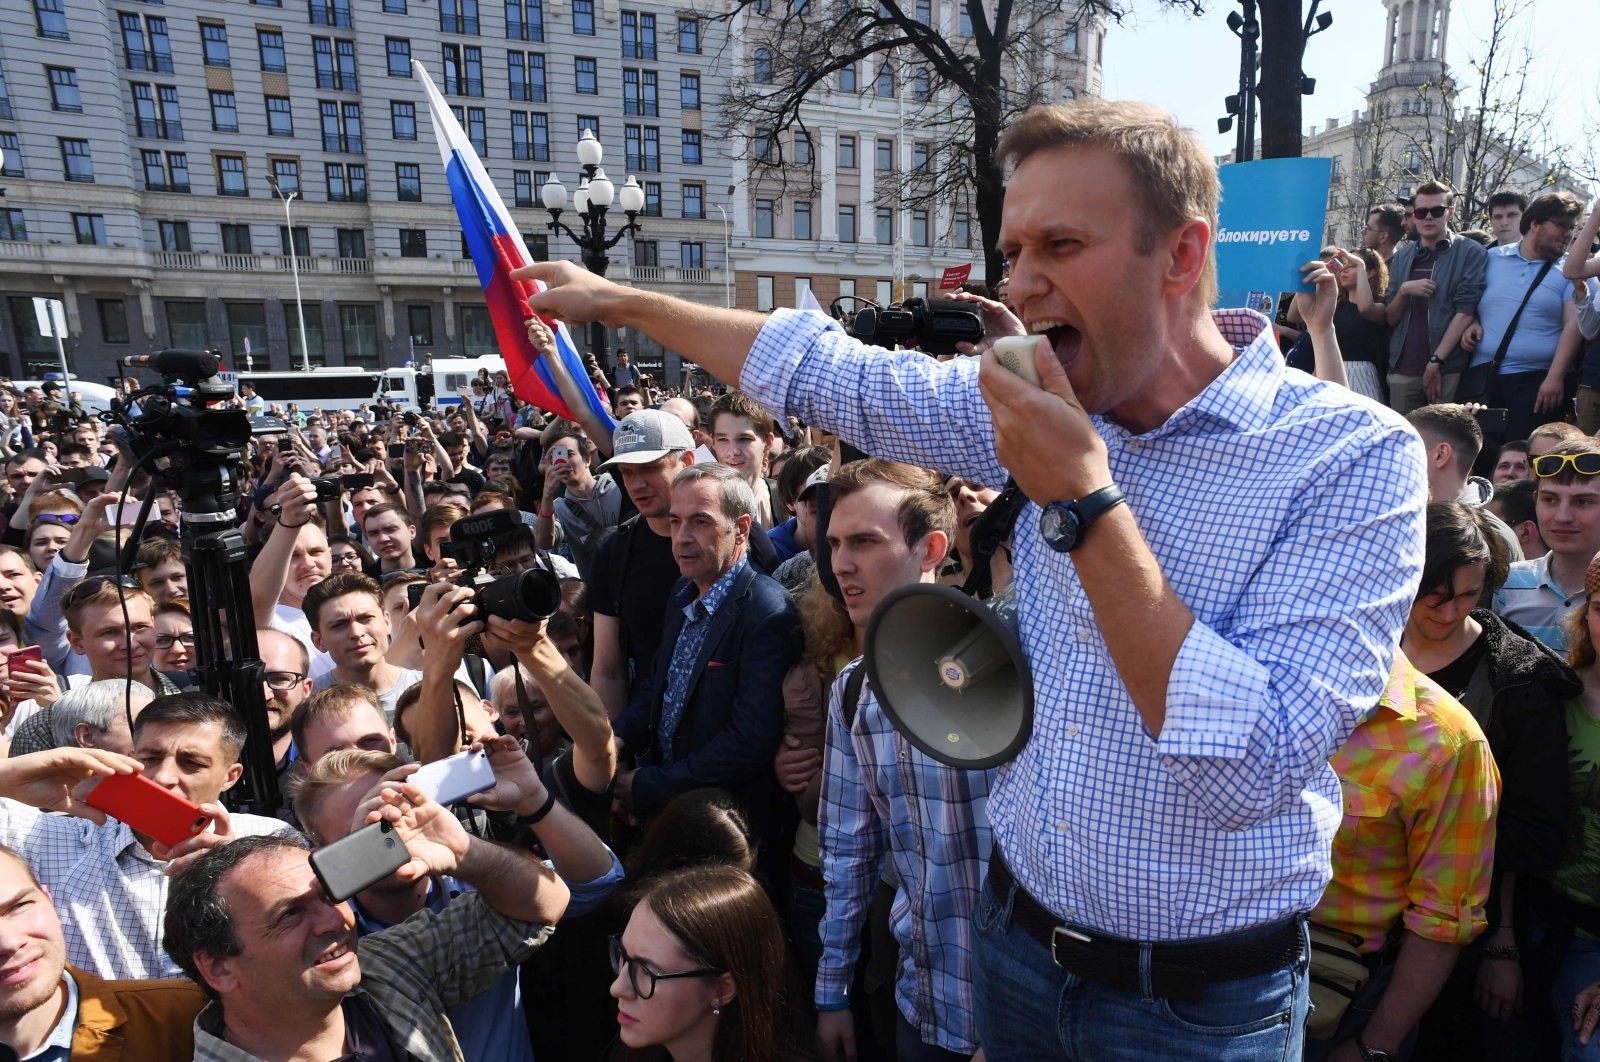 In this file photo taken on May 5, 2018, Russian opposition leader Alexei Navalny addresses supporters during an unauthorized anti-Putin rally in Moscow, two days ahead of Vladimir Putin's inauguration for a fourth Kremlin term. (AFP File Photo)